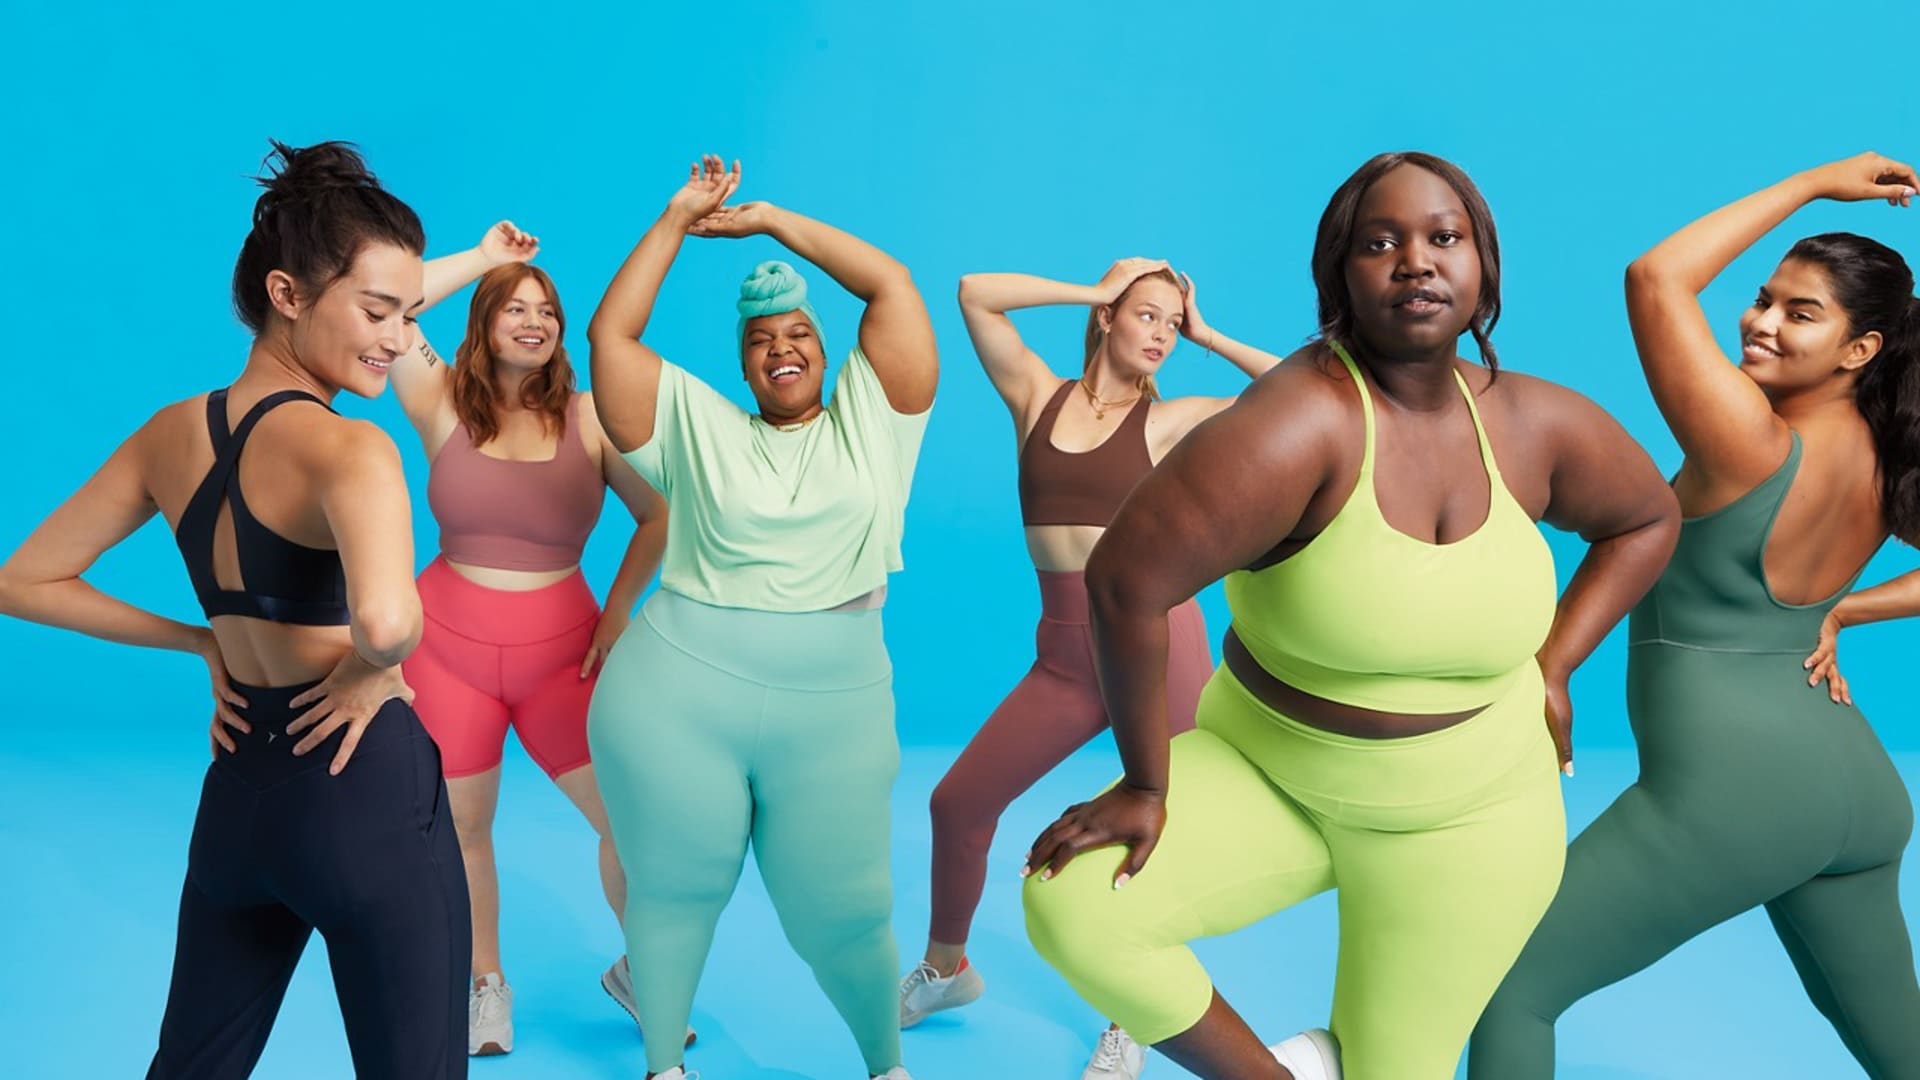 Beginning in late August, Old Navy offer sizes 0-28 and XS-4X for all women's styles in its stores, and up to size 30 online.